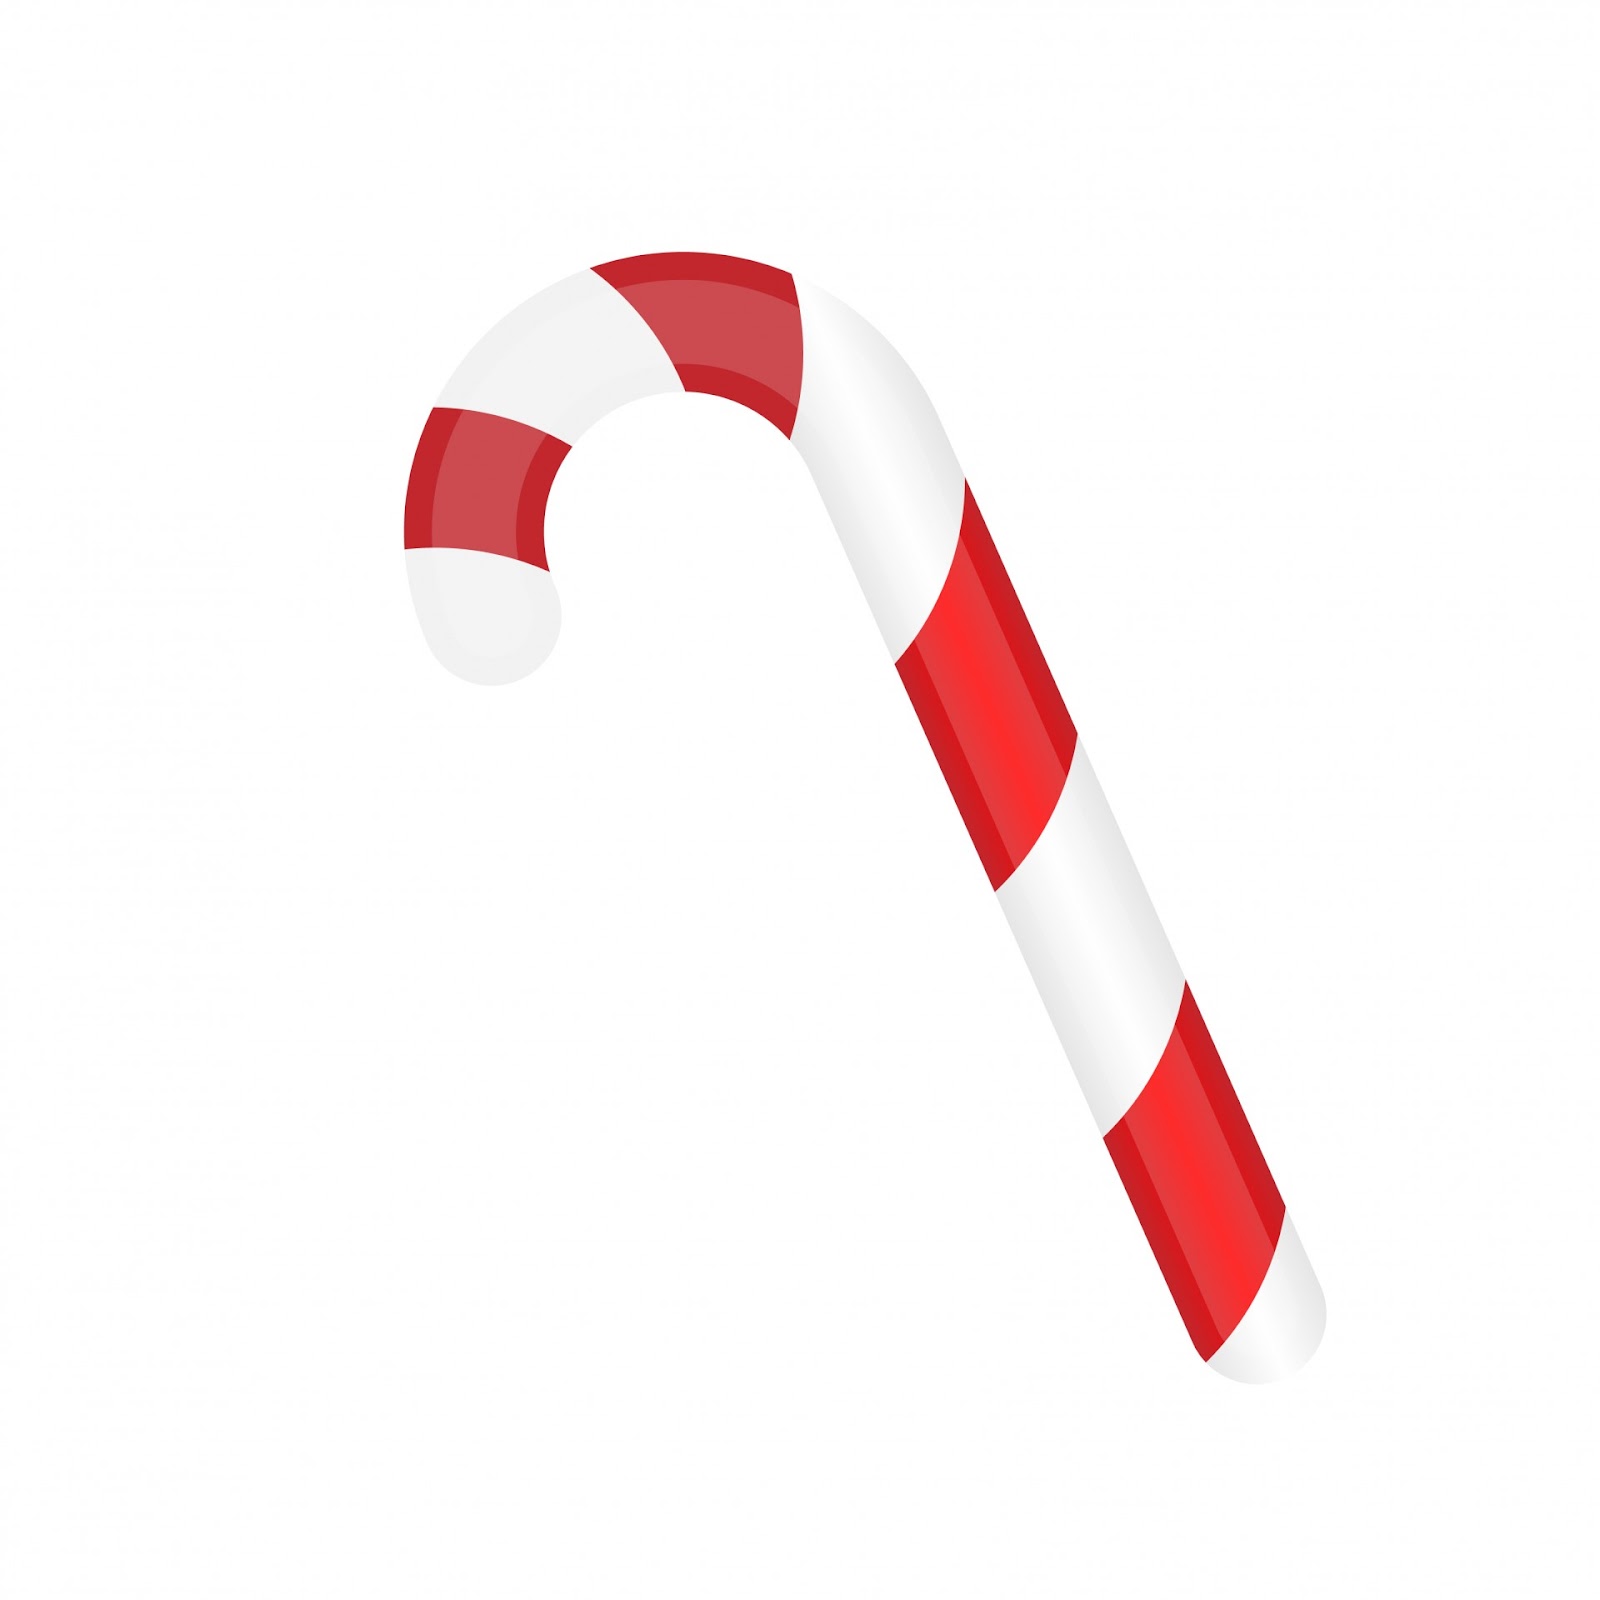 Candy Cane Images - Public Domain Pictures - Page 1